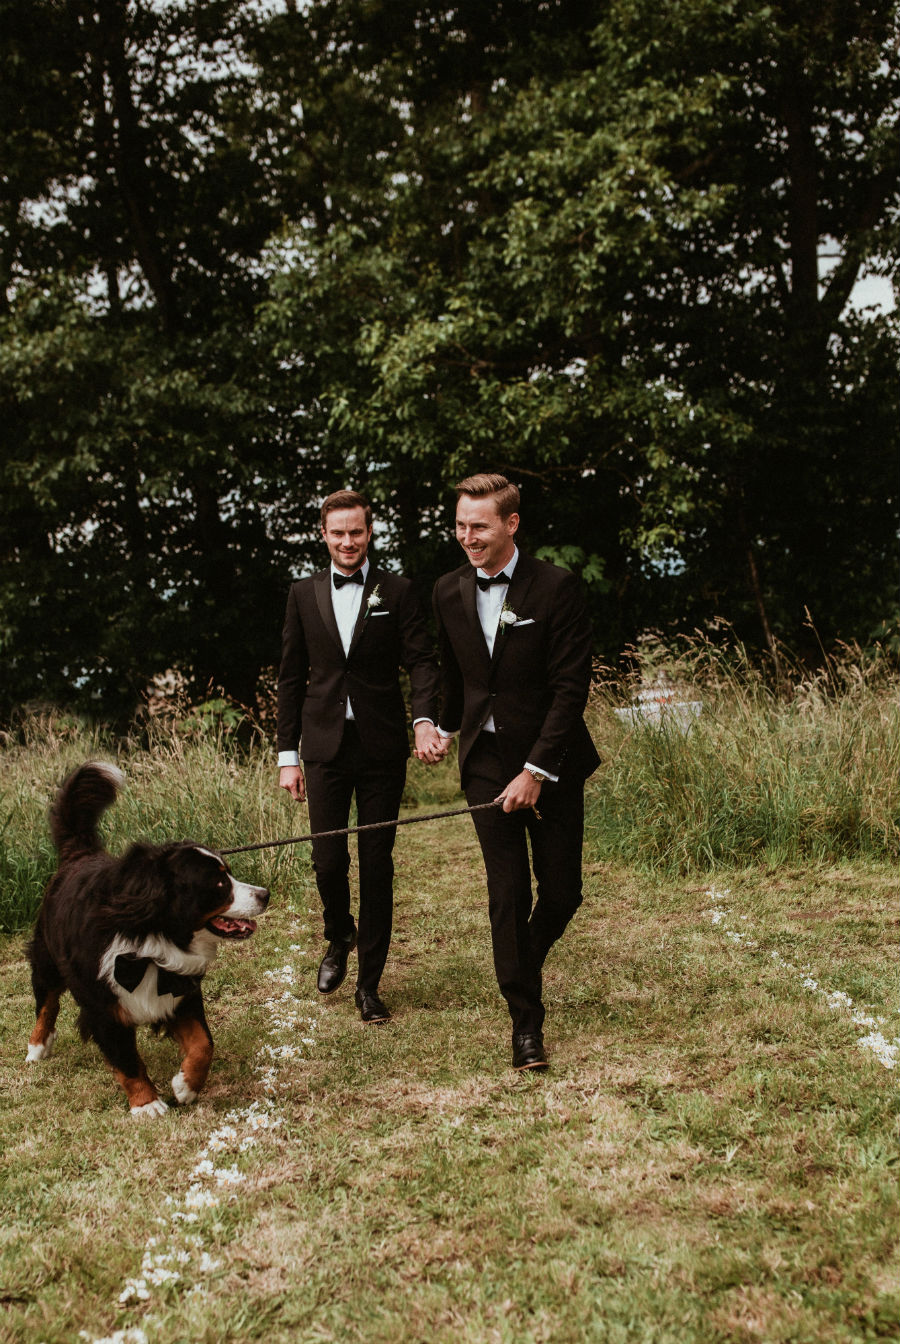 Two male grooms on their wedding day